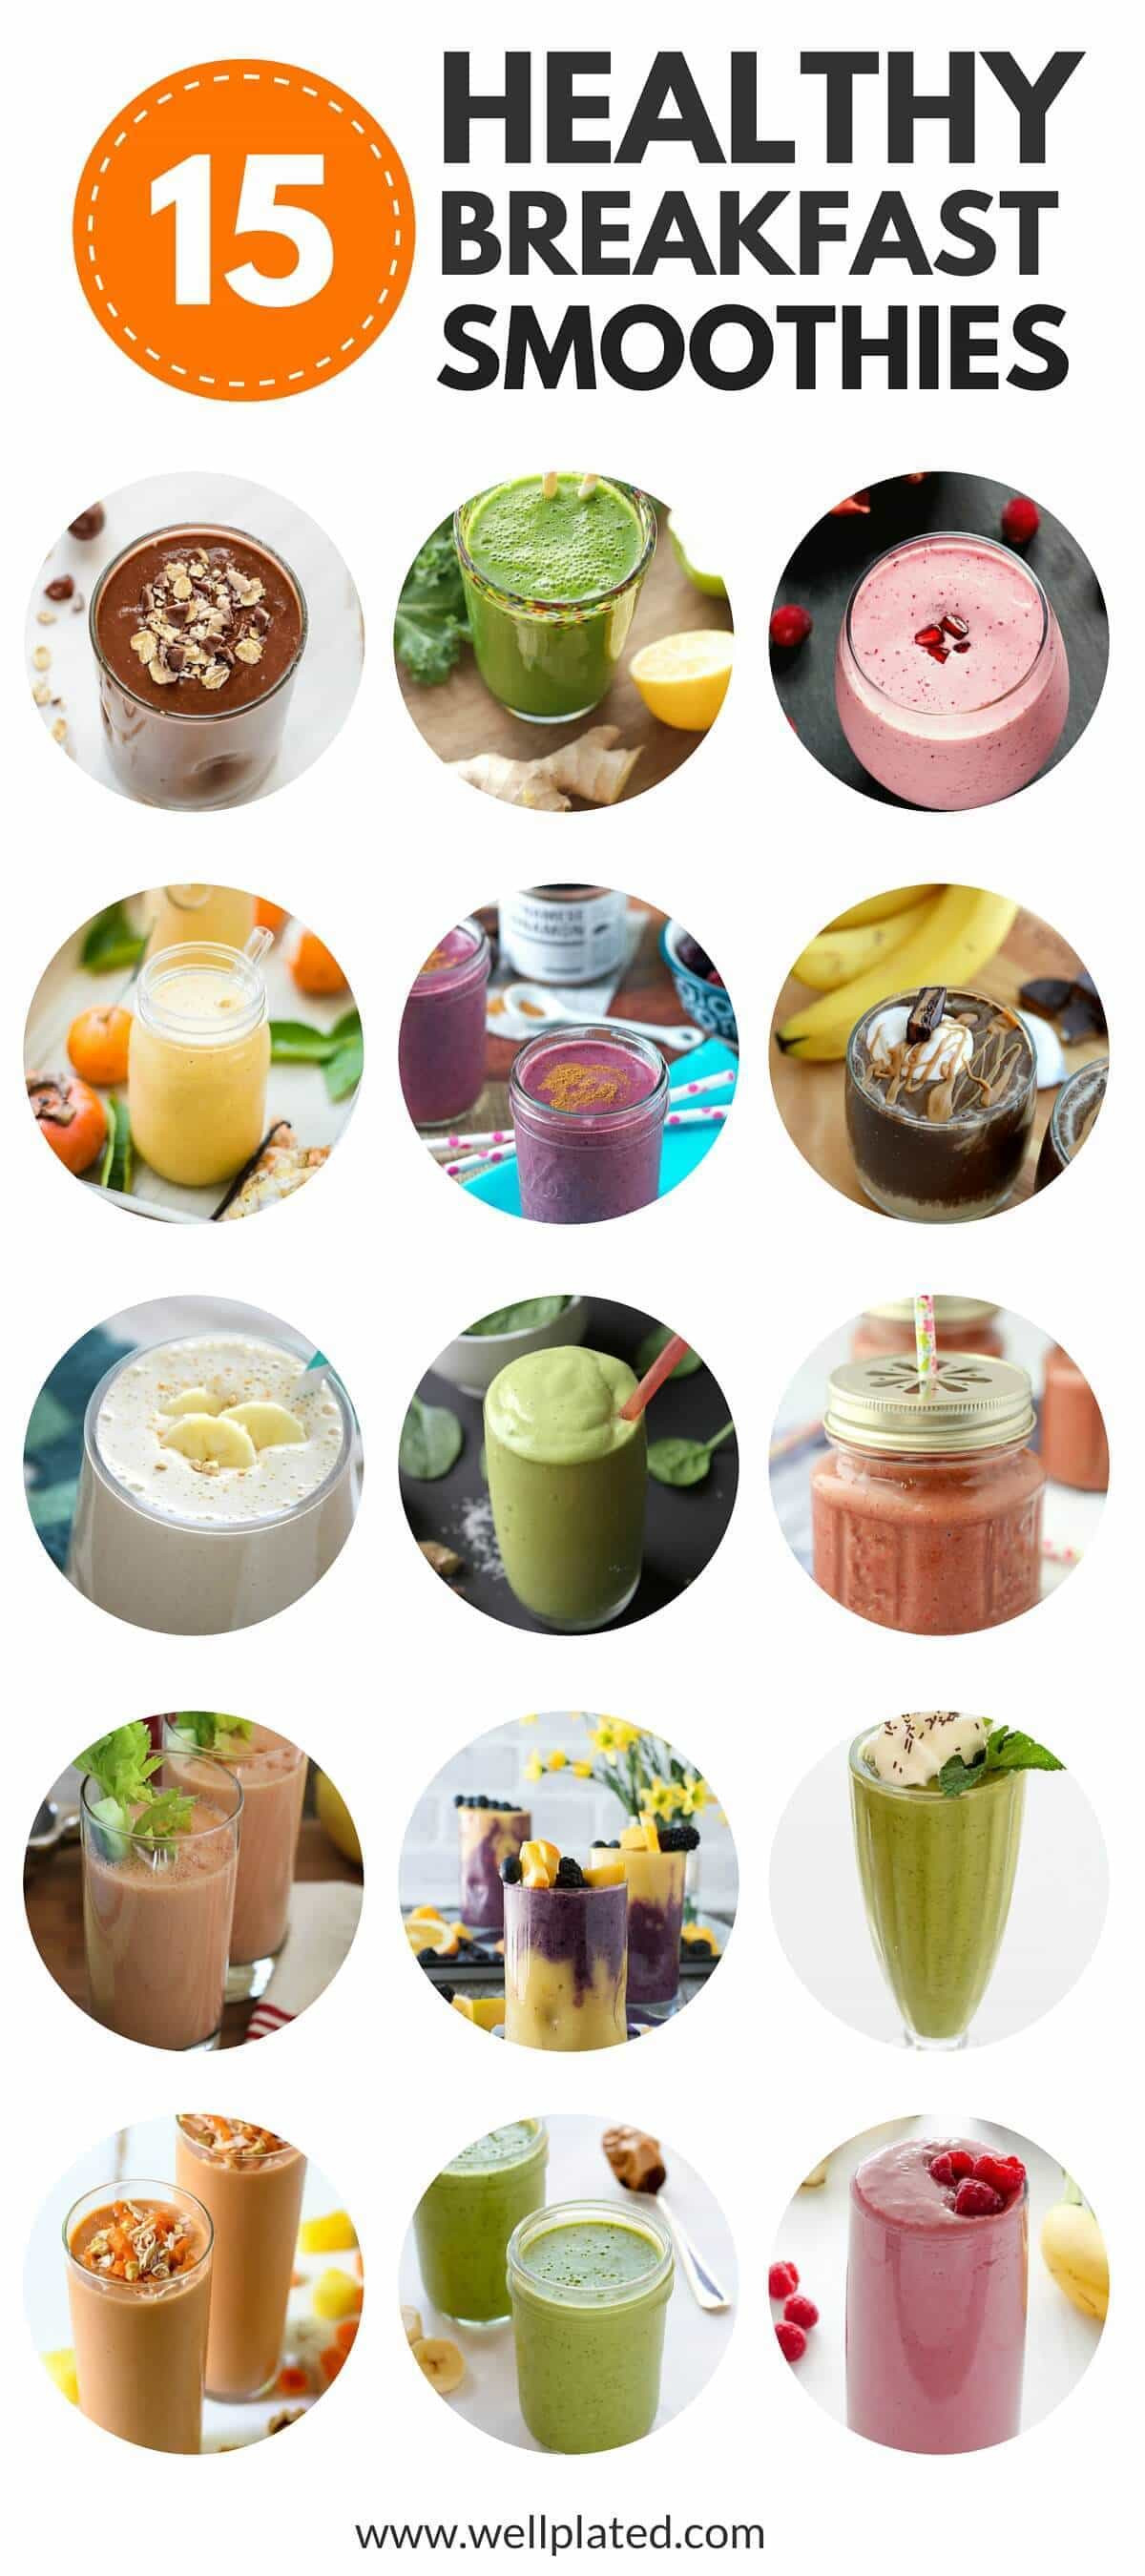 Weight Loss Breakfast Smoothies Recipes
 The Best 15 Healthy Breakfast Smoothies